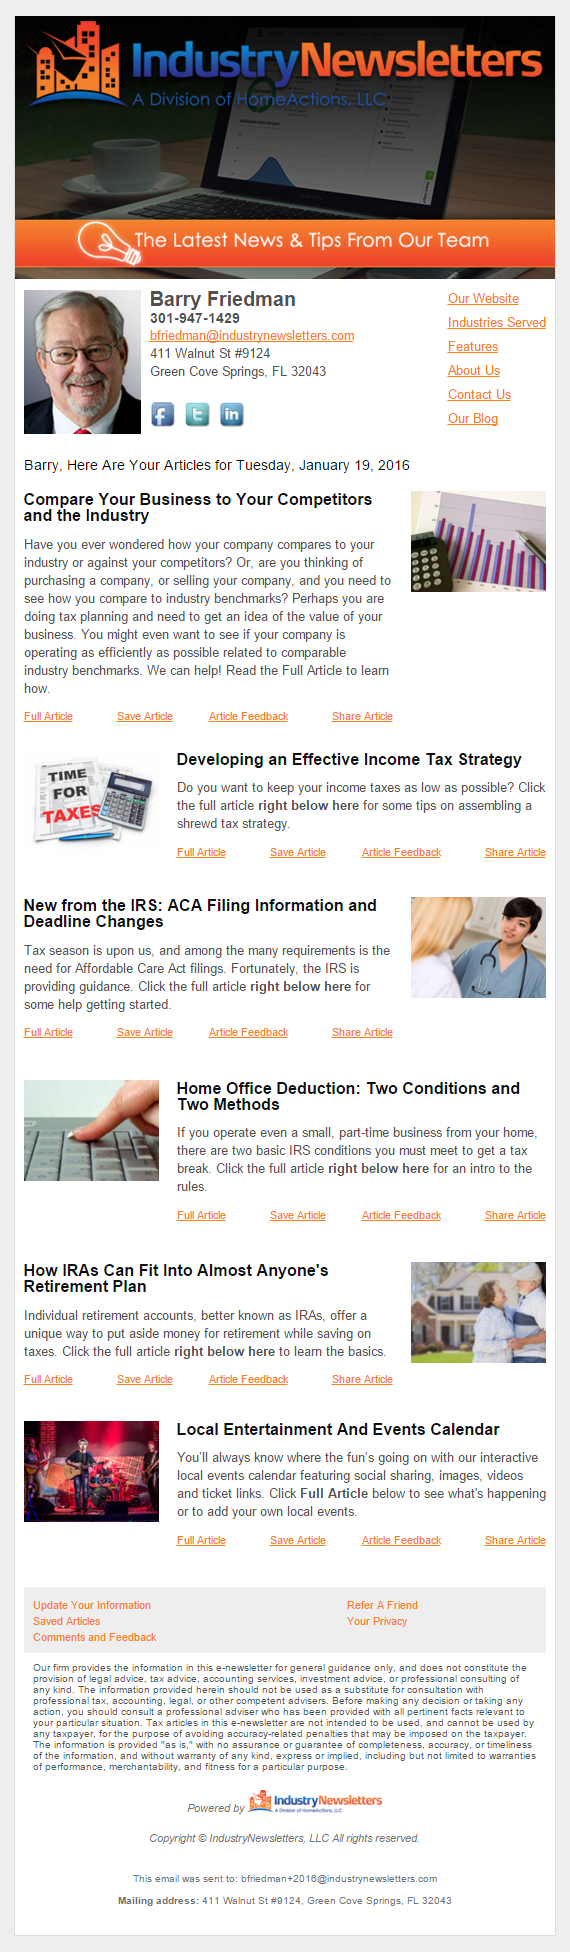 IndustryNewsletters with ProfitCents Integrated Content for CPA Firms Sample Email Newsletter